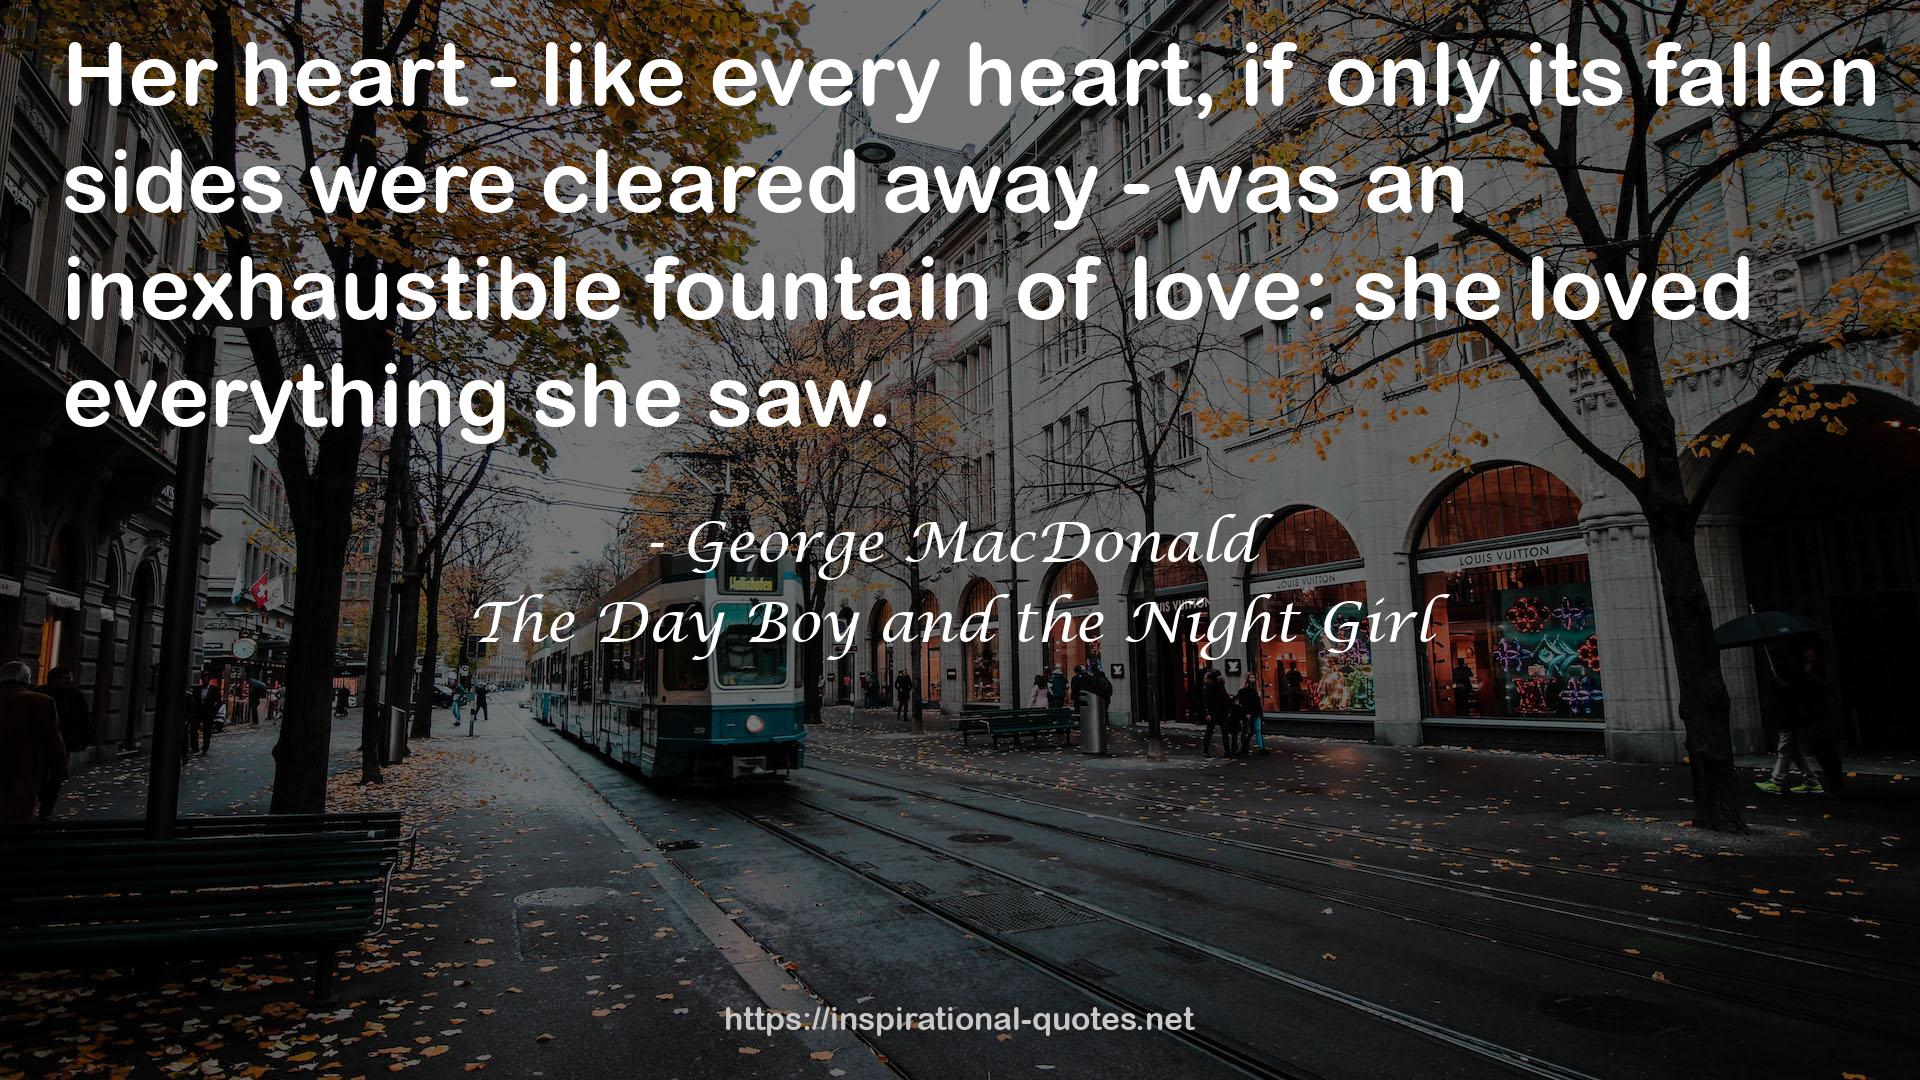 The Day Boy and the Night Girl QUOTES